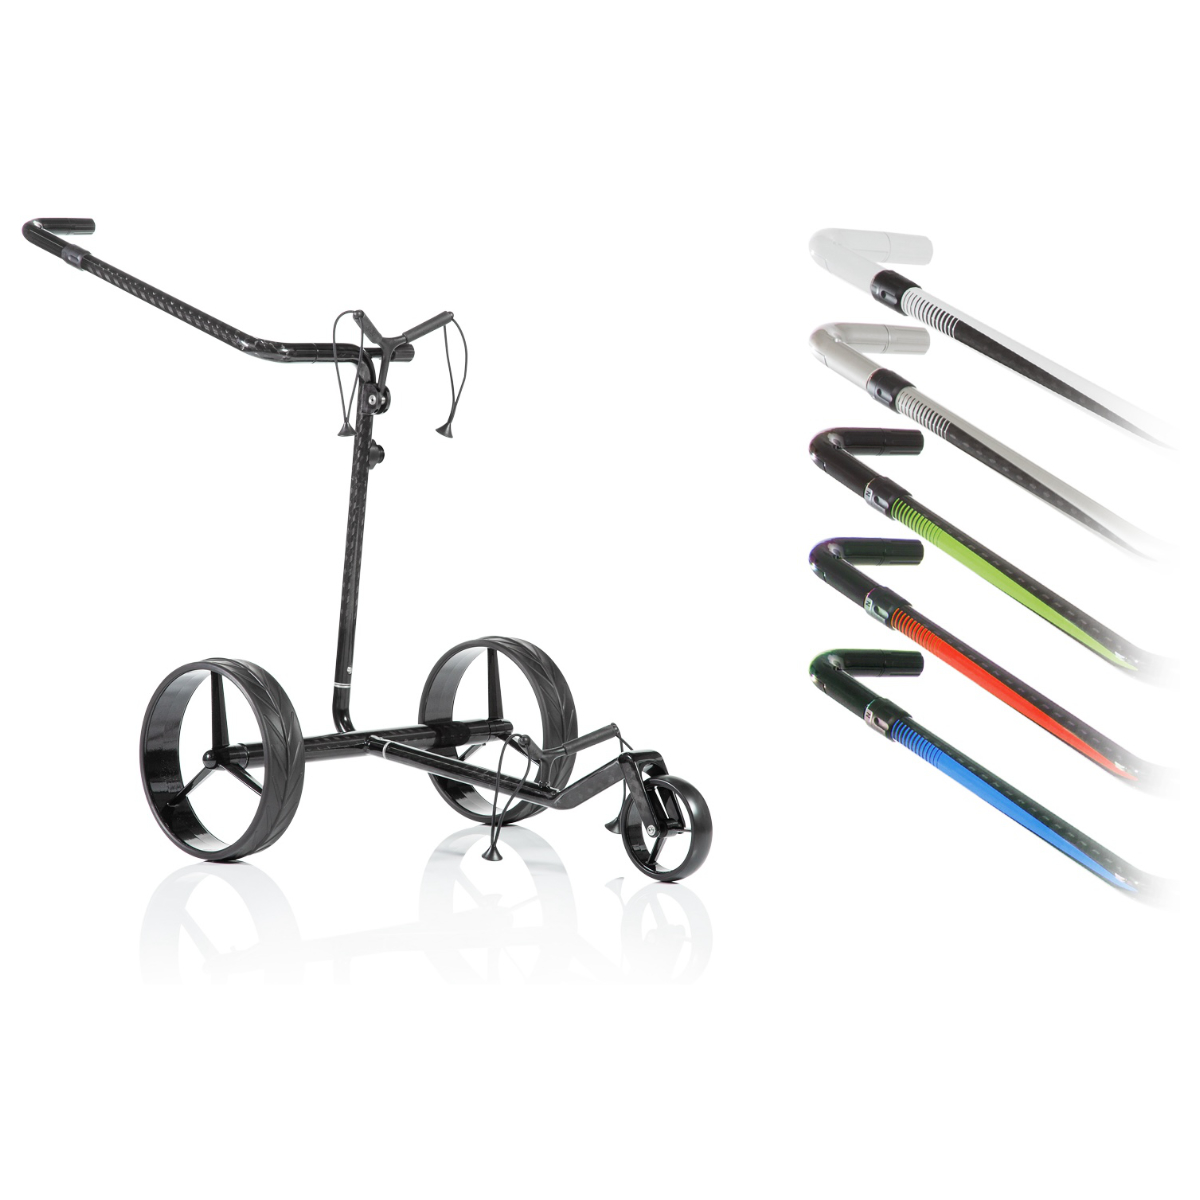 JuCad Carbon Travel 2.0 Camouflage E-Trolley